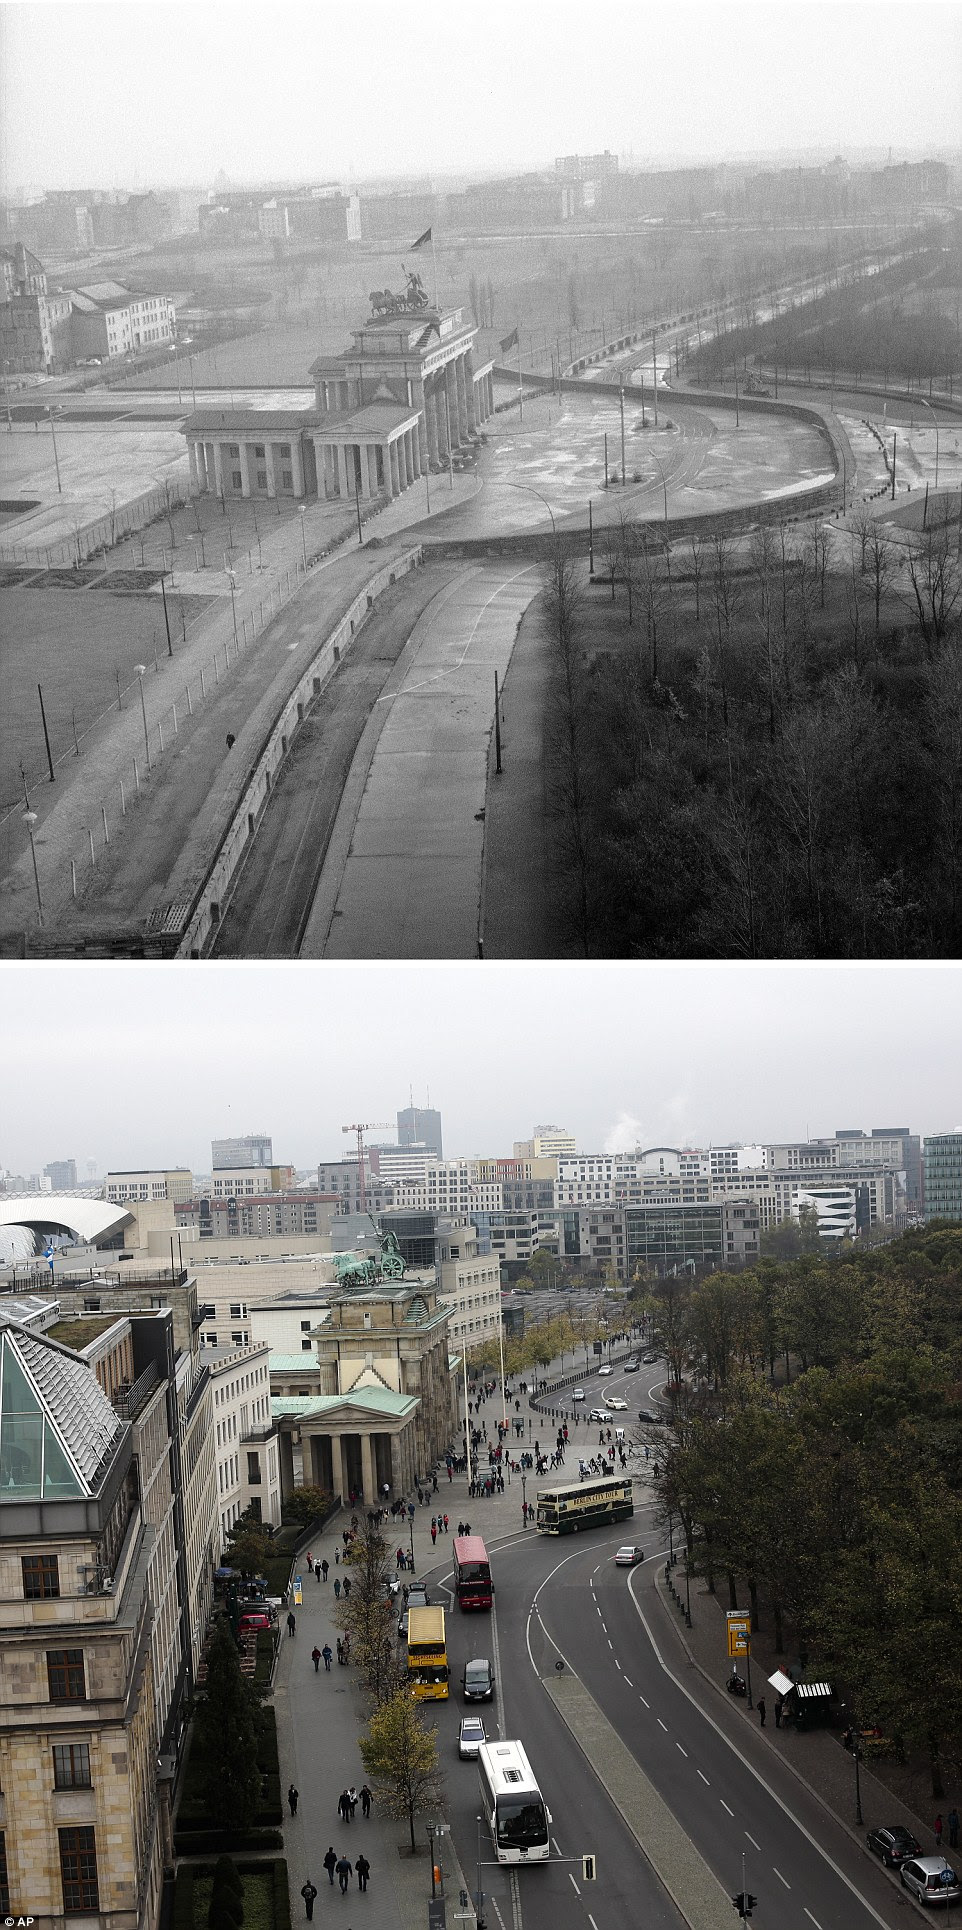 Bustling: The Berlin Wall was built by East Germany in 1961, and the top image shows the wall around the Brandenburg Gate on Nov 19, 1961. Today the same area is filled with cars, buses and people moving freely around the German capital